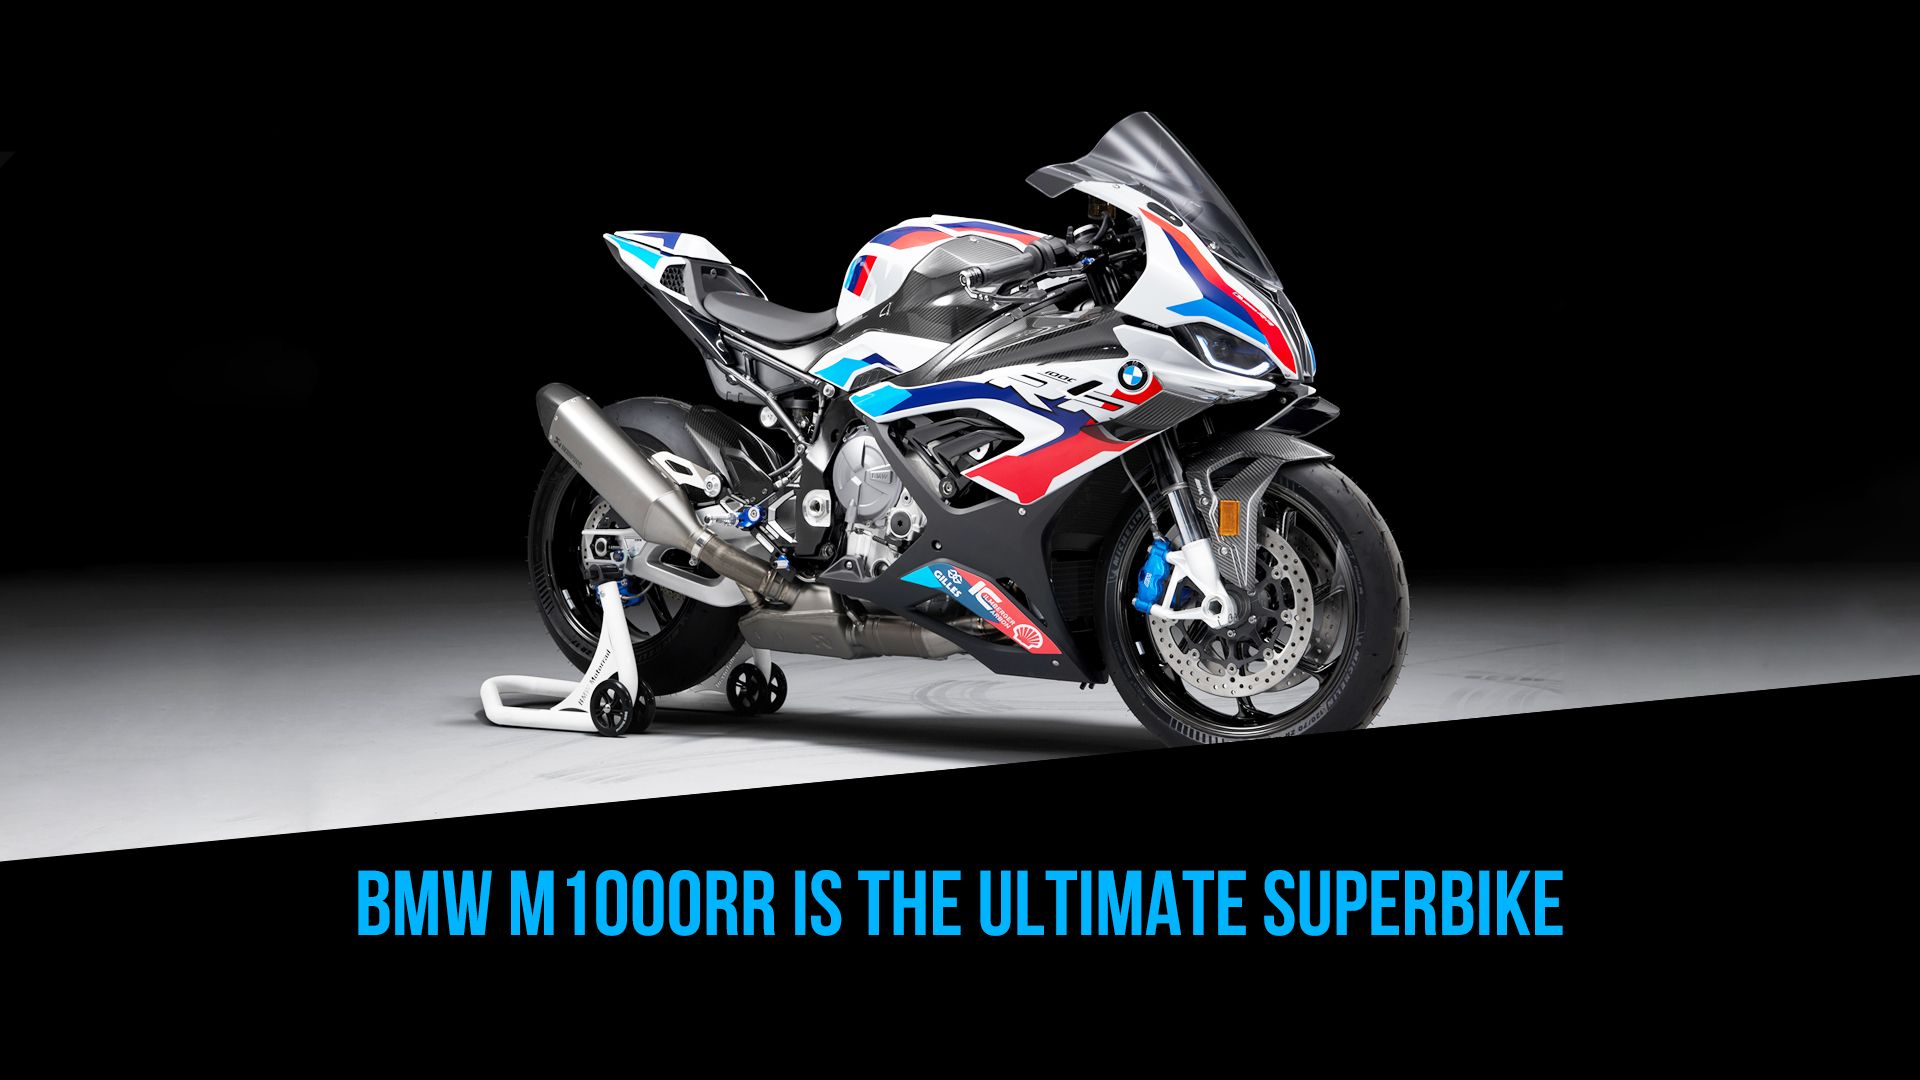 10 Reasons Why The BMW M1000RR Is The Ultimate Superbike